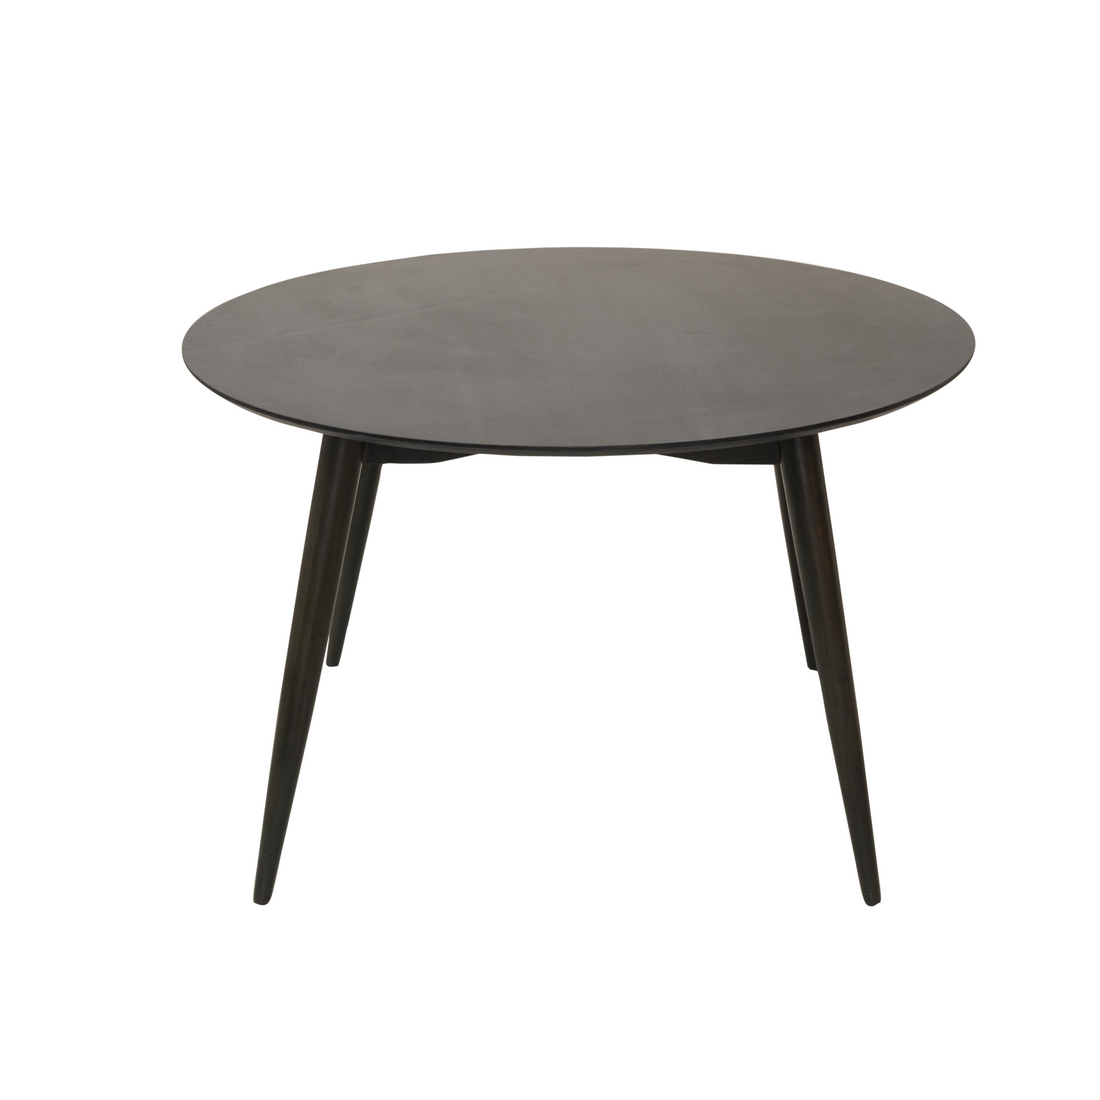 M21 Club Dining Table - Round